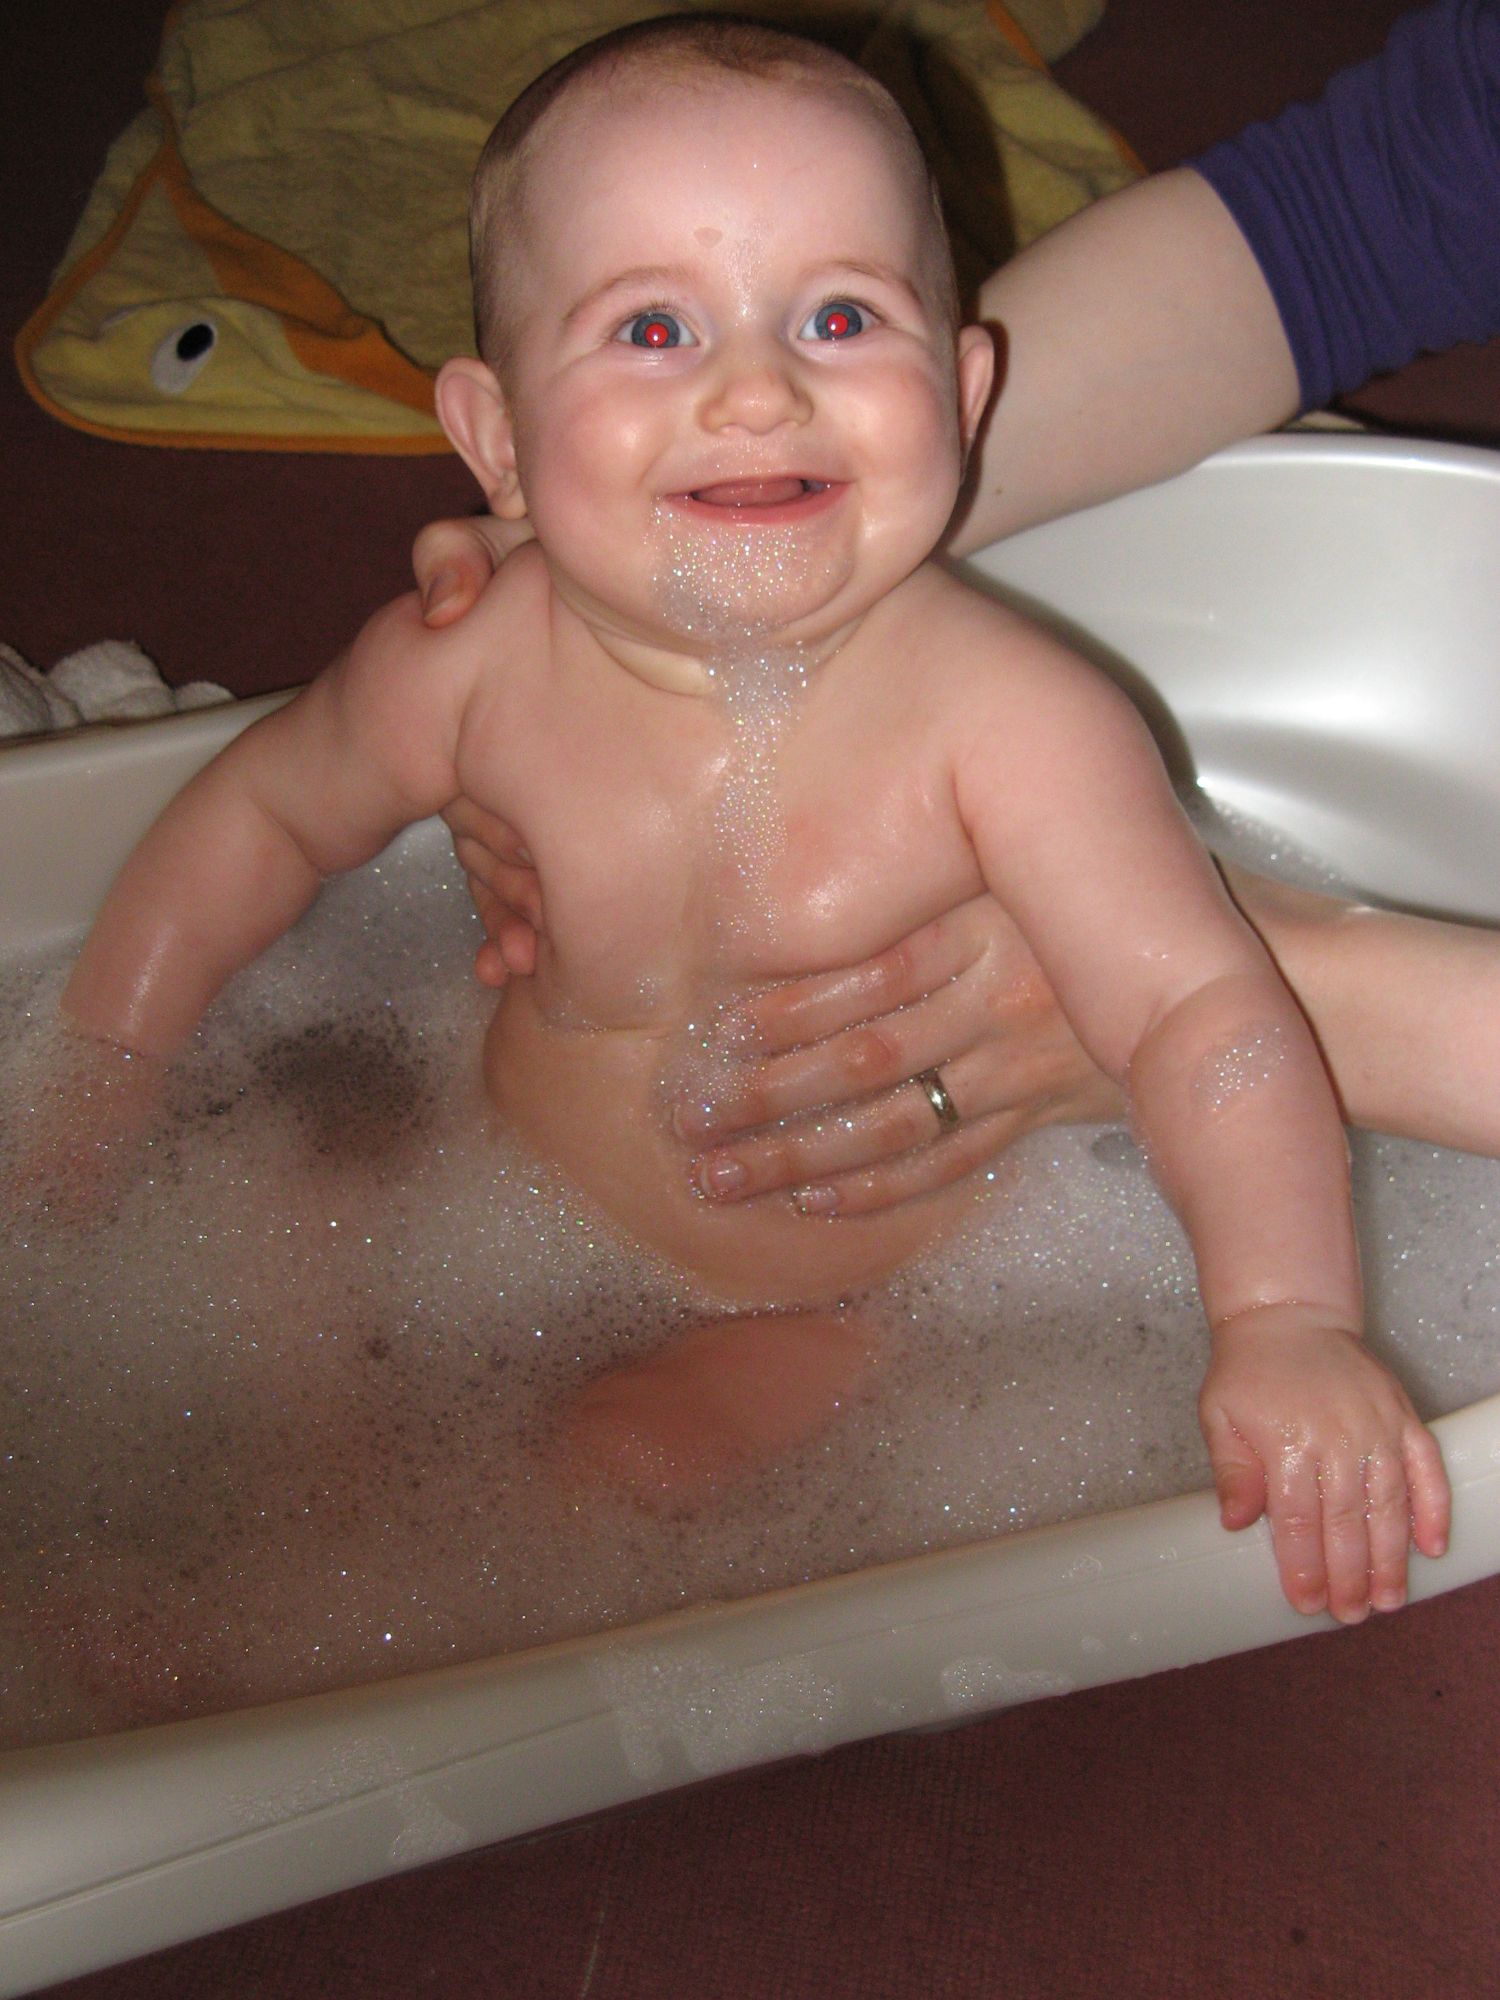 Image of a baby, aged a few months old, grinning at the camera. They are being supported sitting in a baby bath.